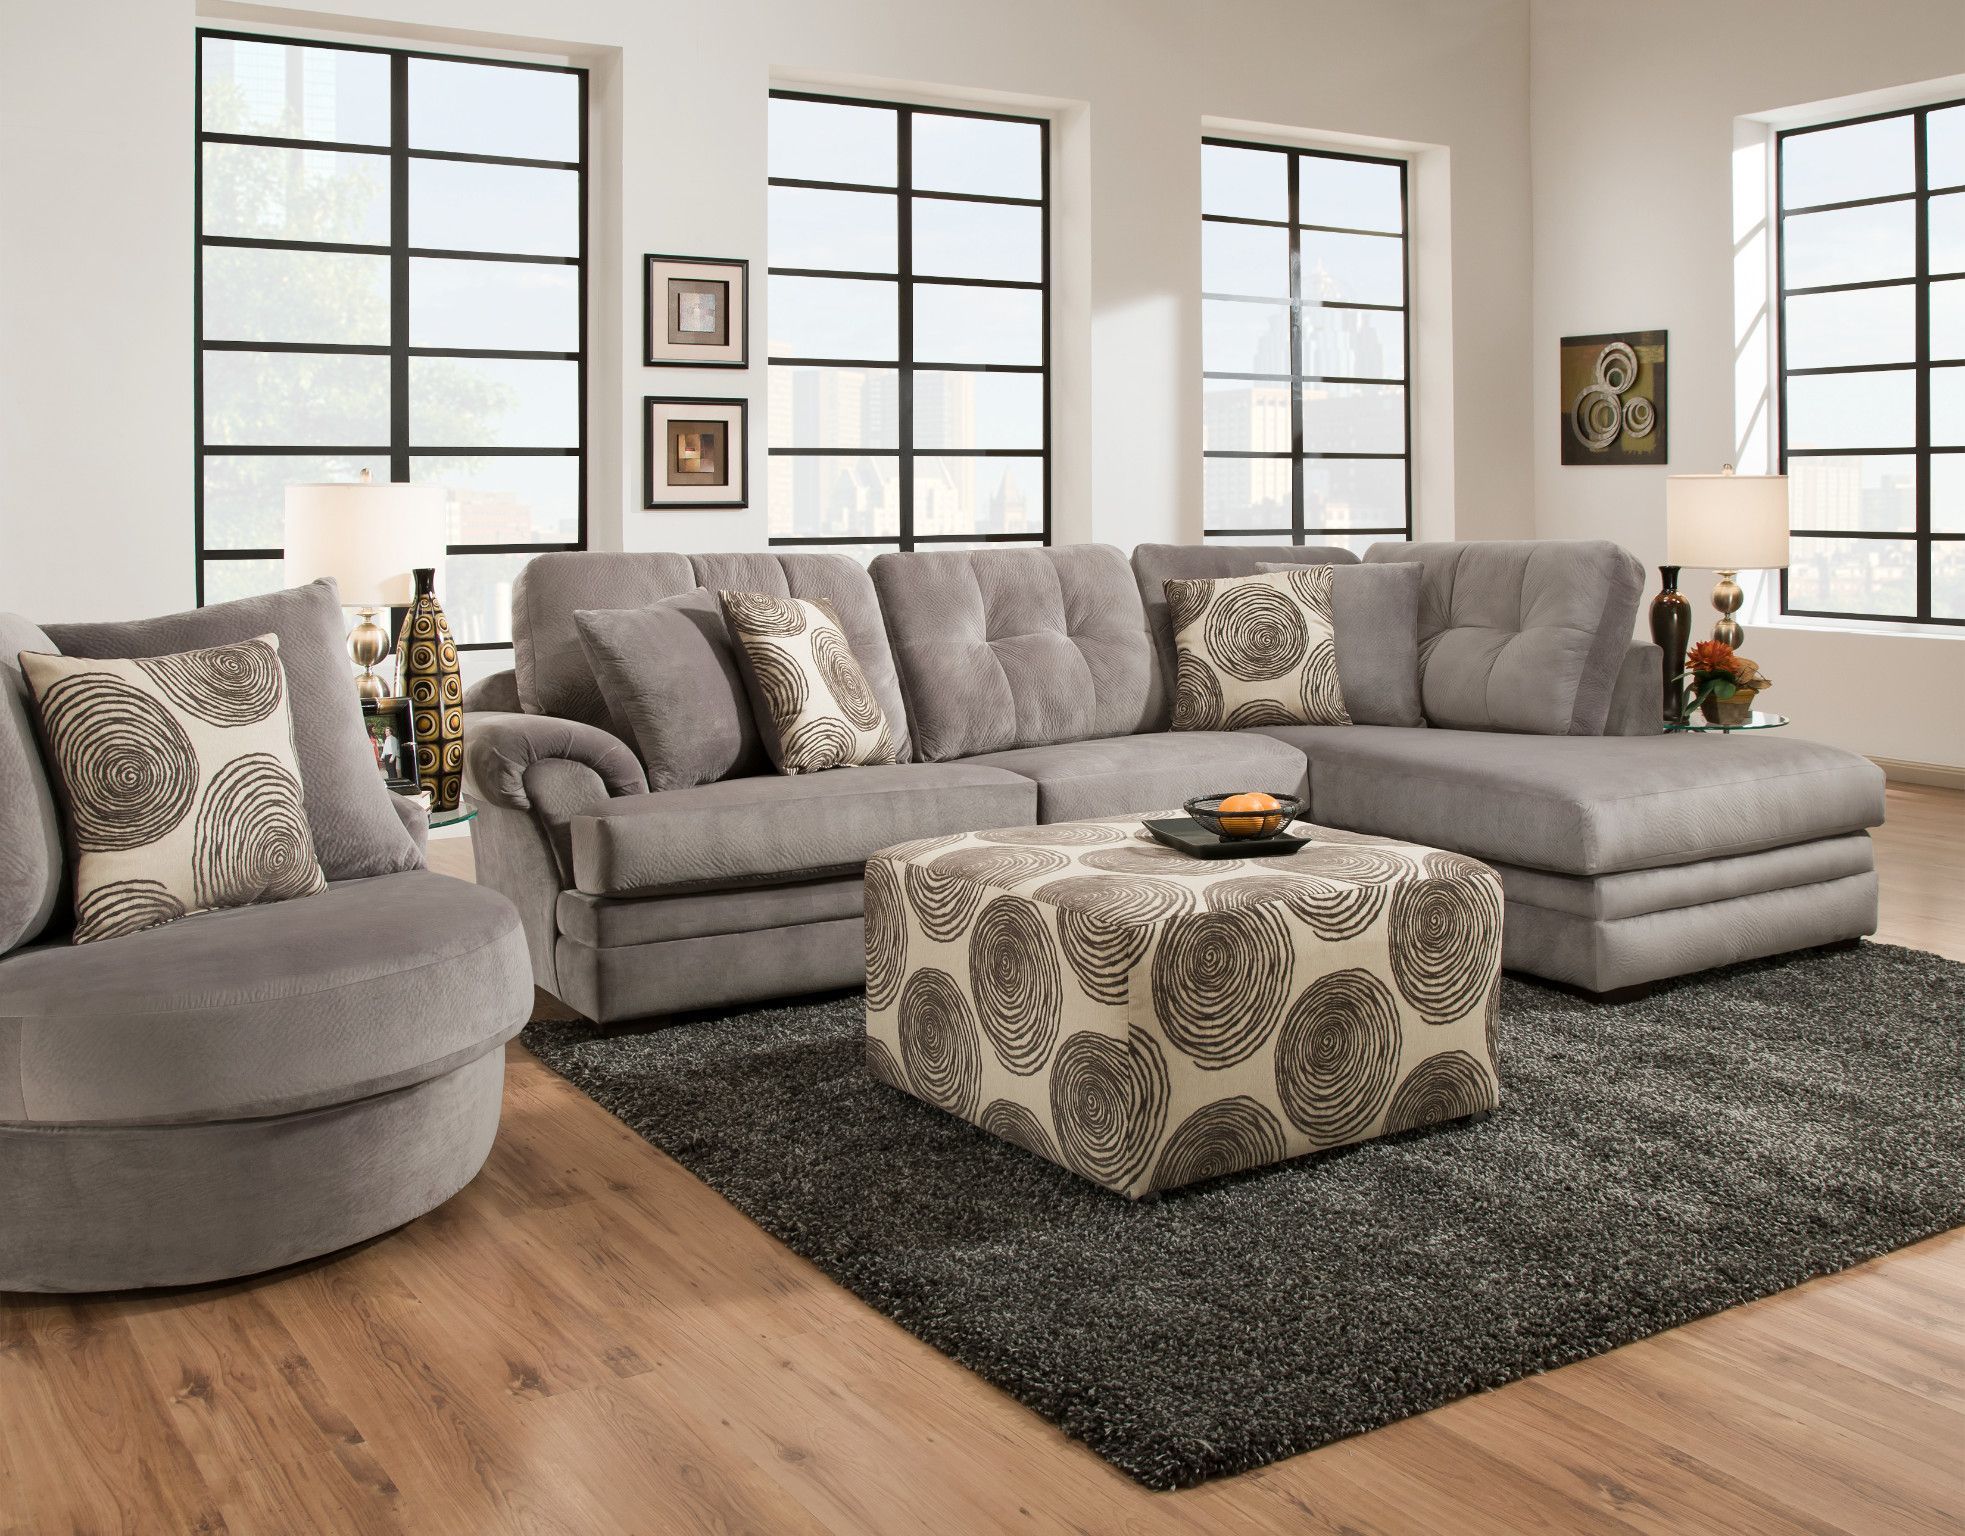 Knockout 2 Piece Sectional In Knockout Grey 16b3lf Left Facing Sofa Pertaining To Dark Gray Sectional Sofas (Gallery 18 of 20)